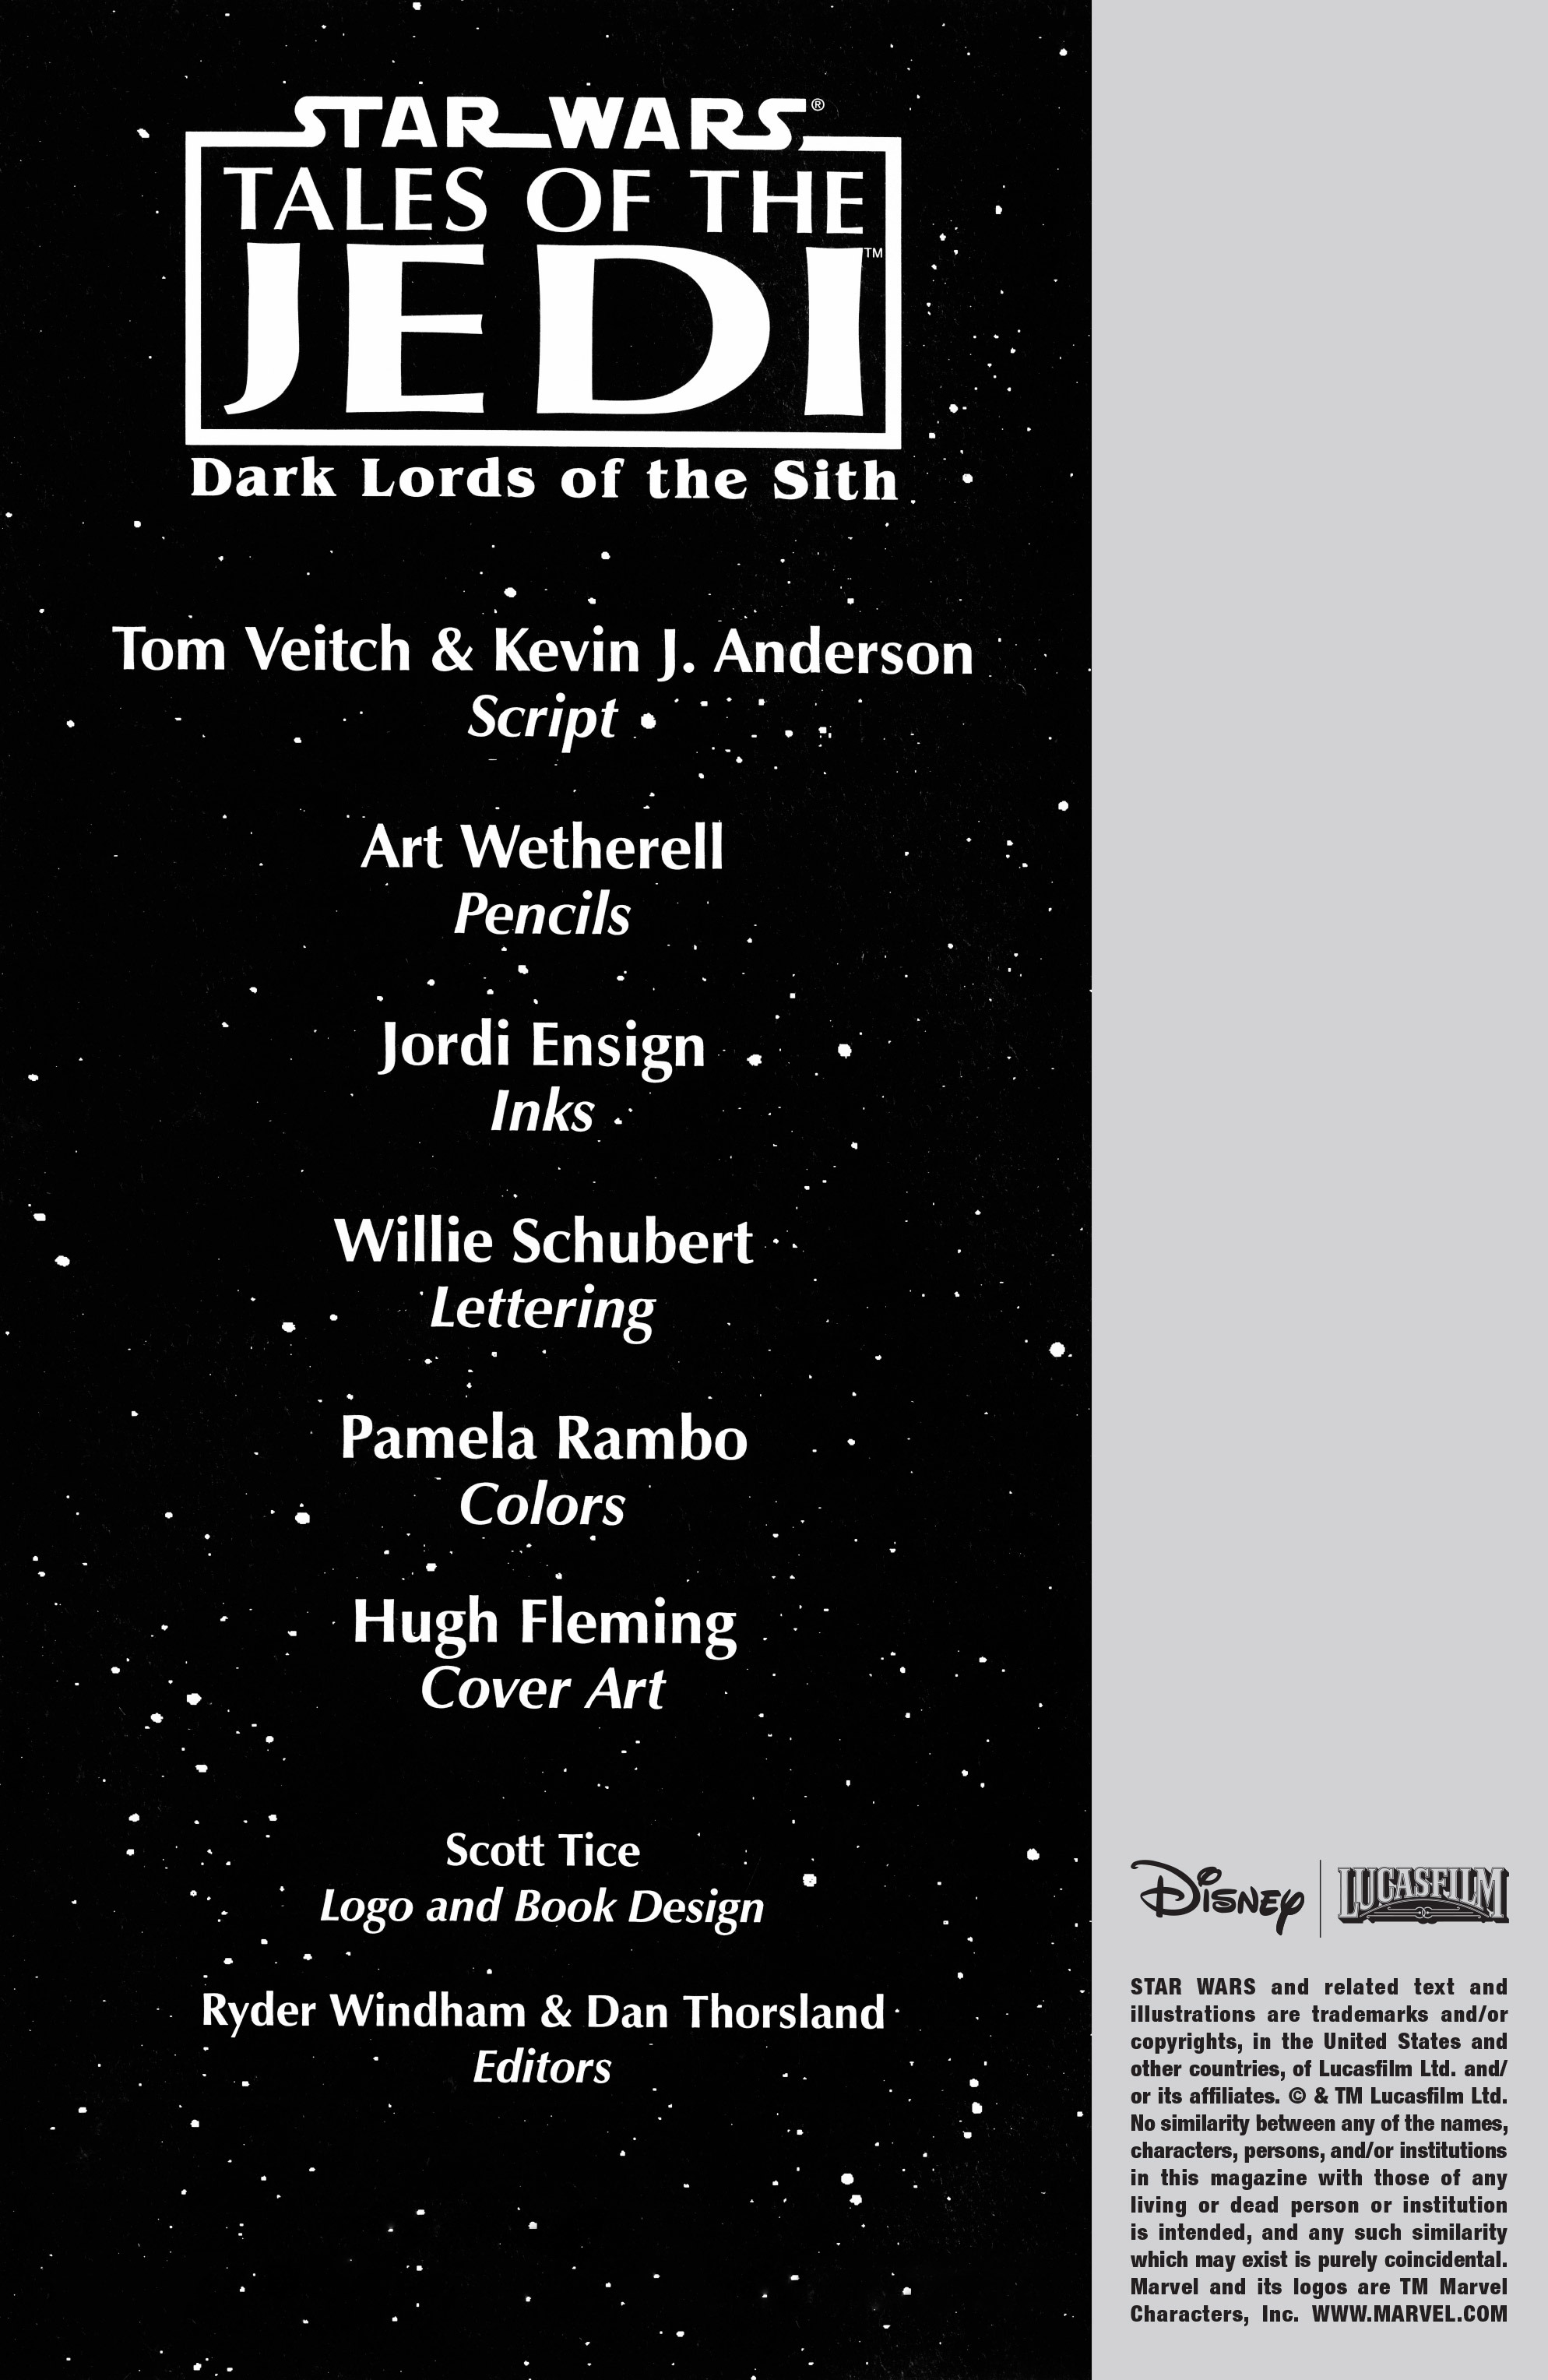 Read online Star Wars: Tales of the Jedi - Dark Lords of the Sith comic -  Issue #6 - 2